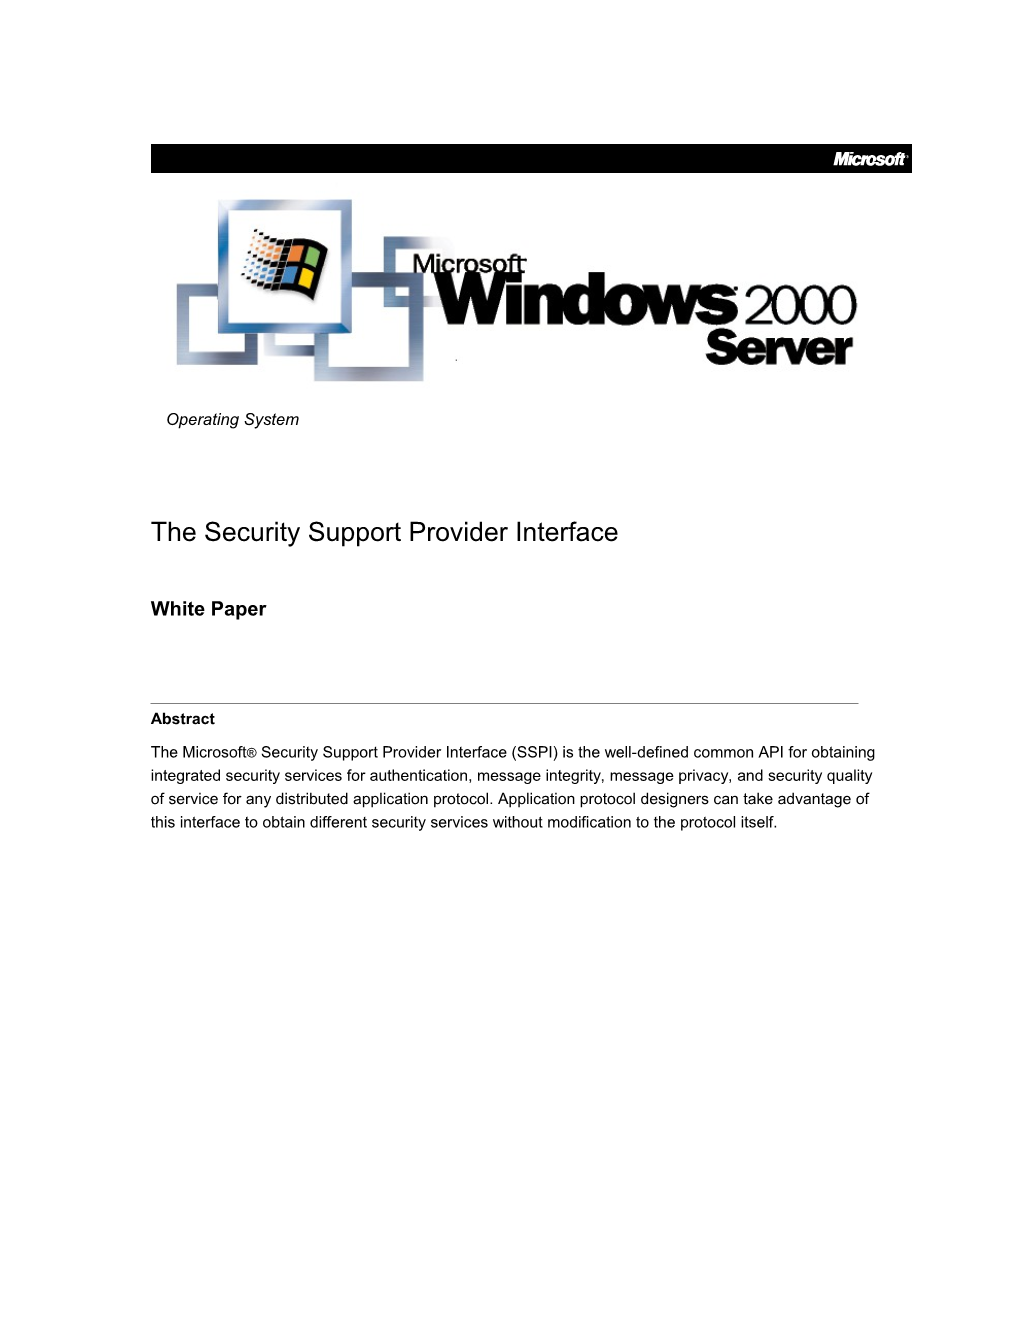 The Security Support Provider Interface